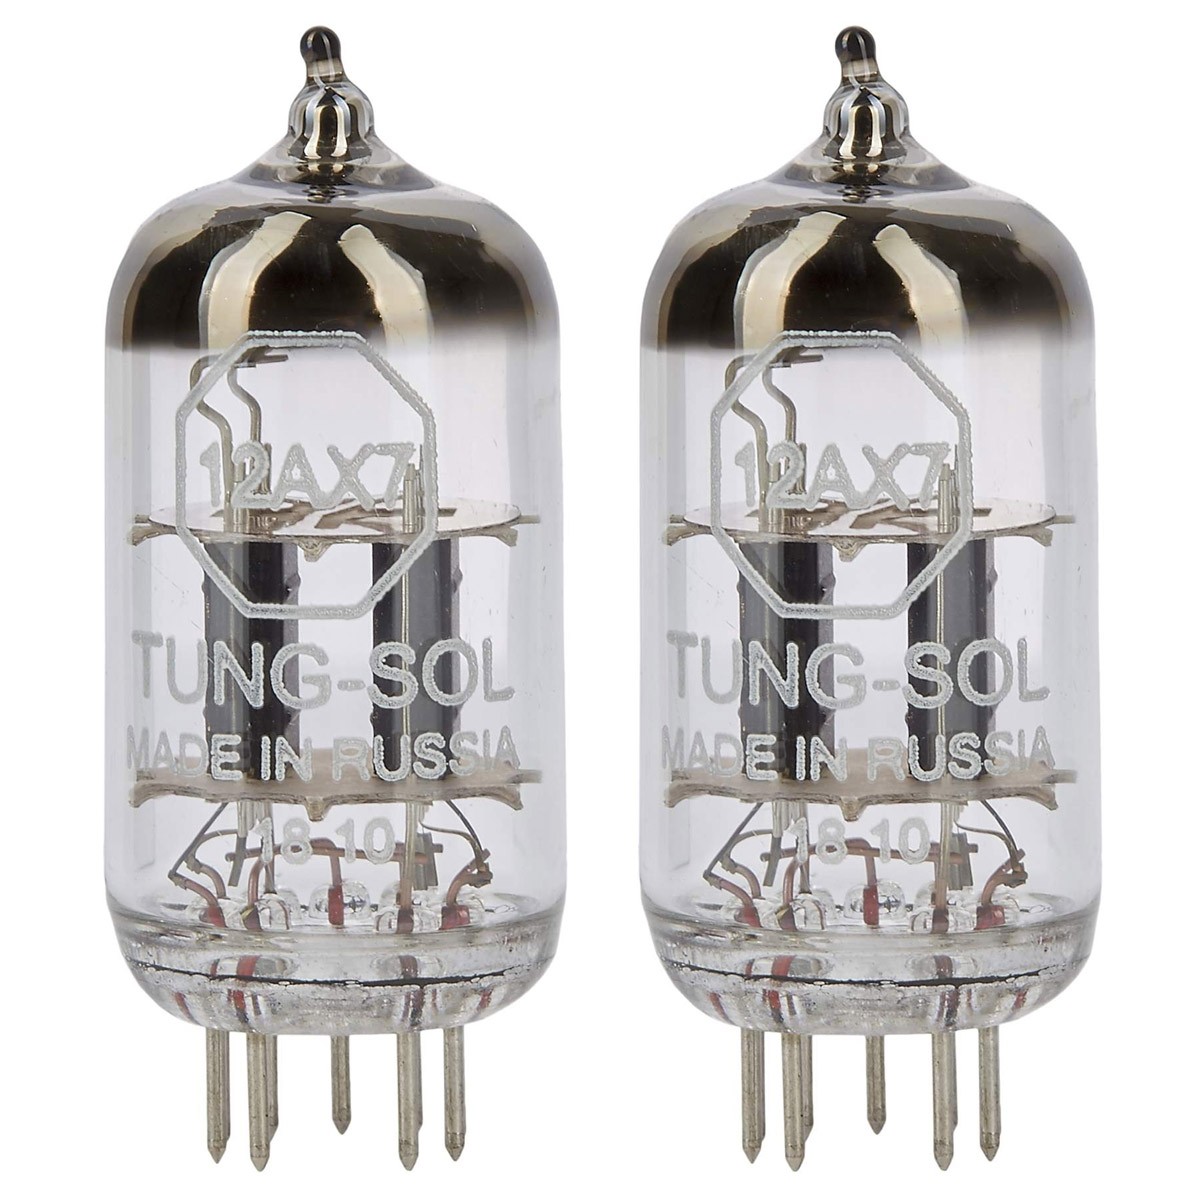 TUNG-SOL 12AX7 Tubes Triodes (Matched Pair)